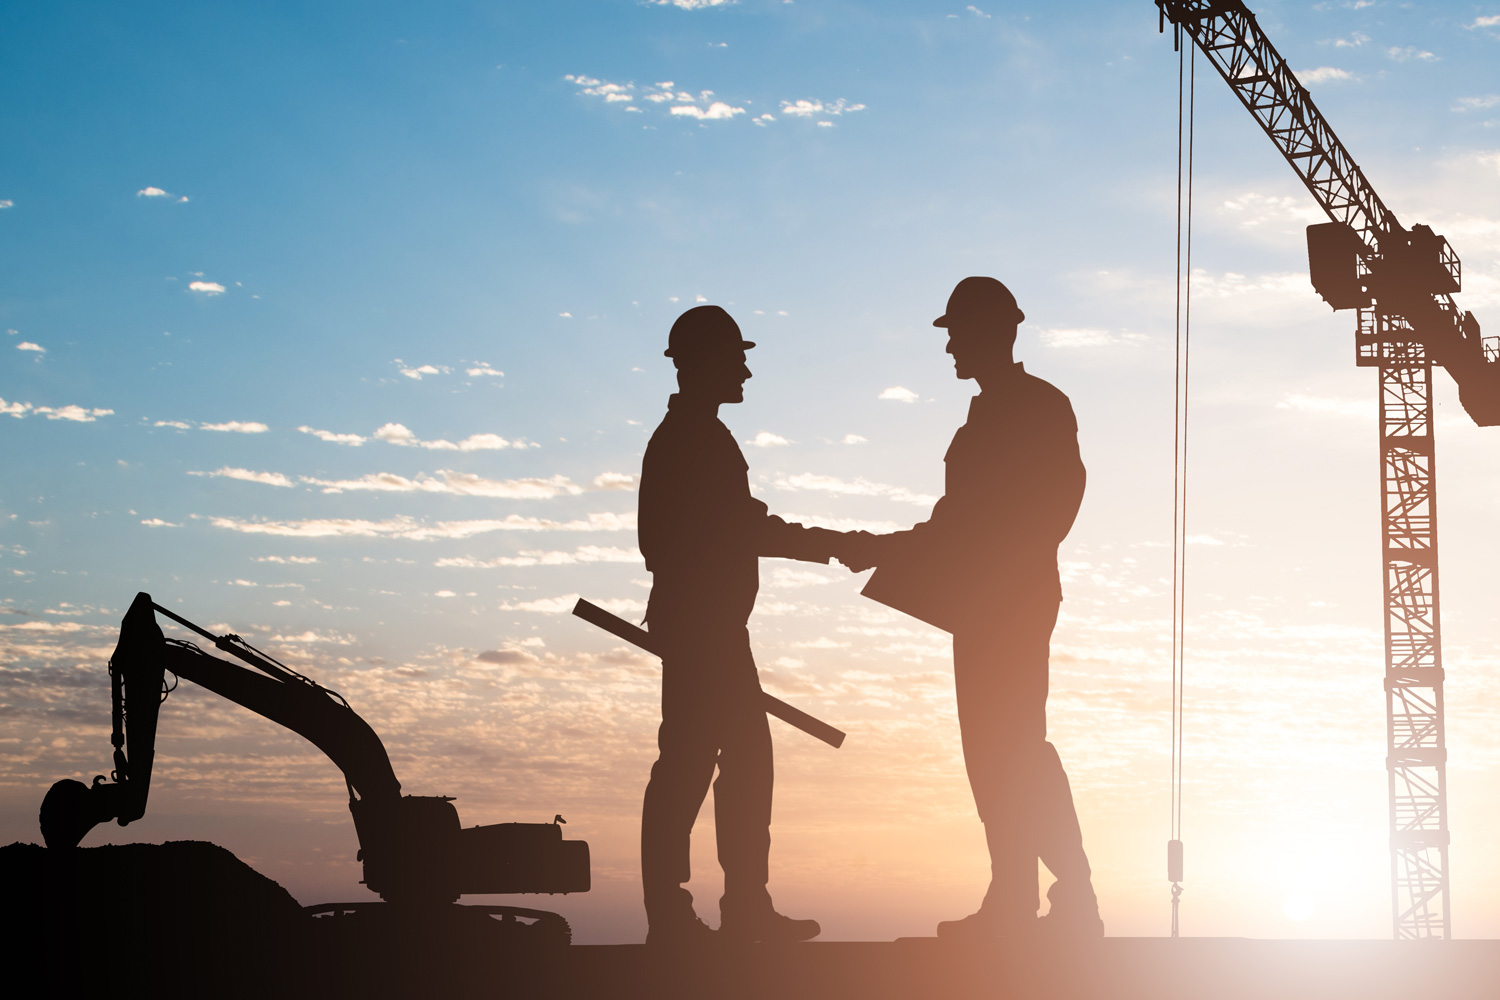 Contractor shaking hands with a supplier after signing a payment bond